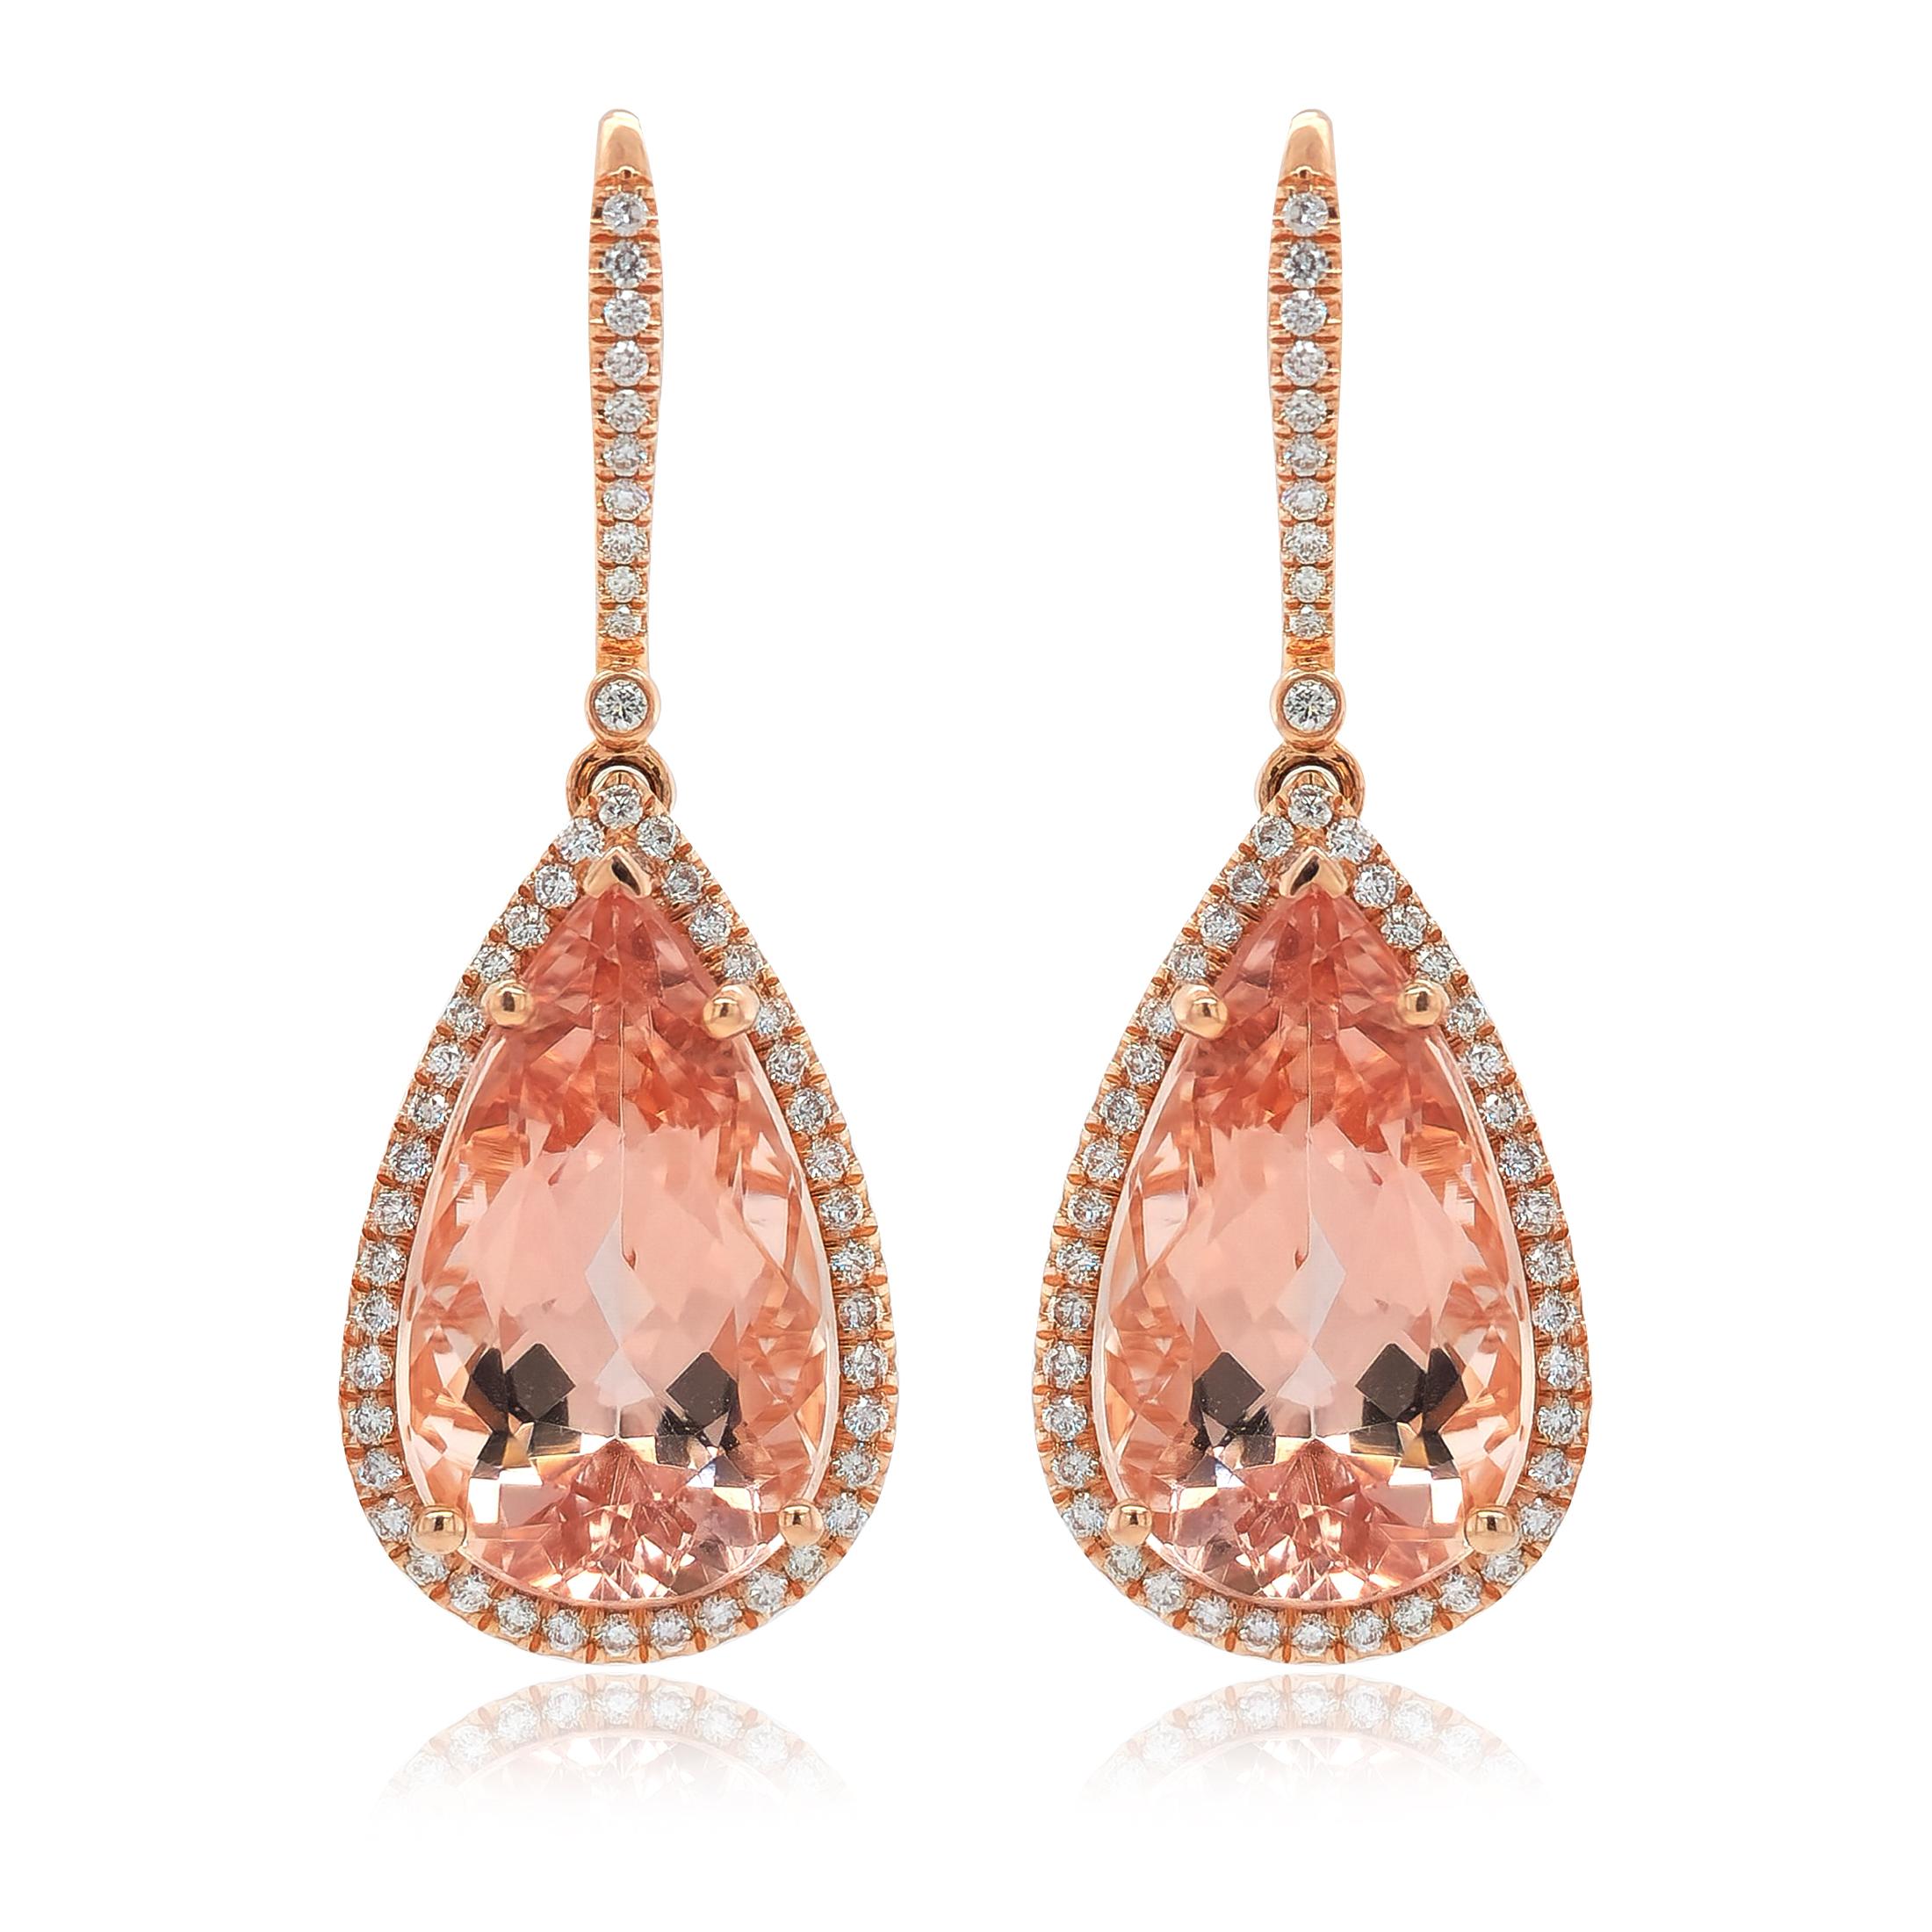  Natural Morganites 15.54 Carat Diamond Earrings  In New Condition For Sale In Los Angeles, CA